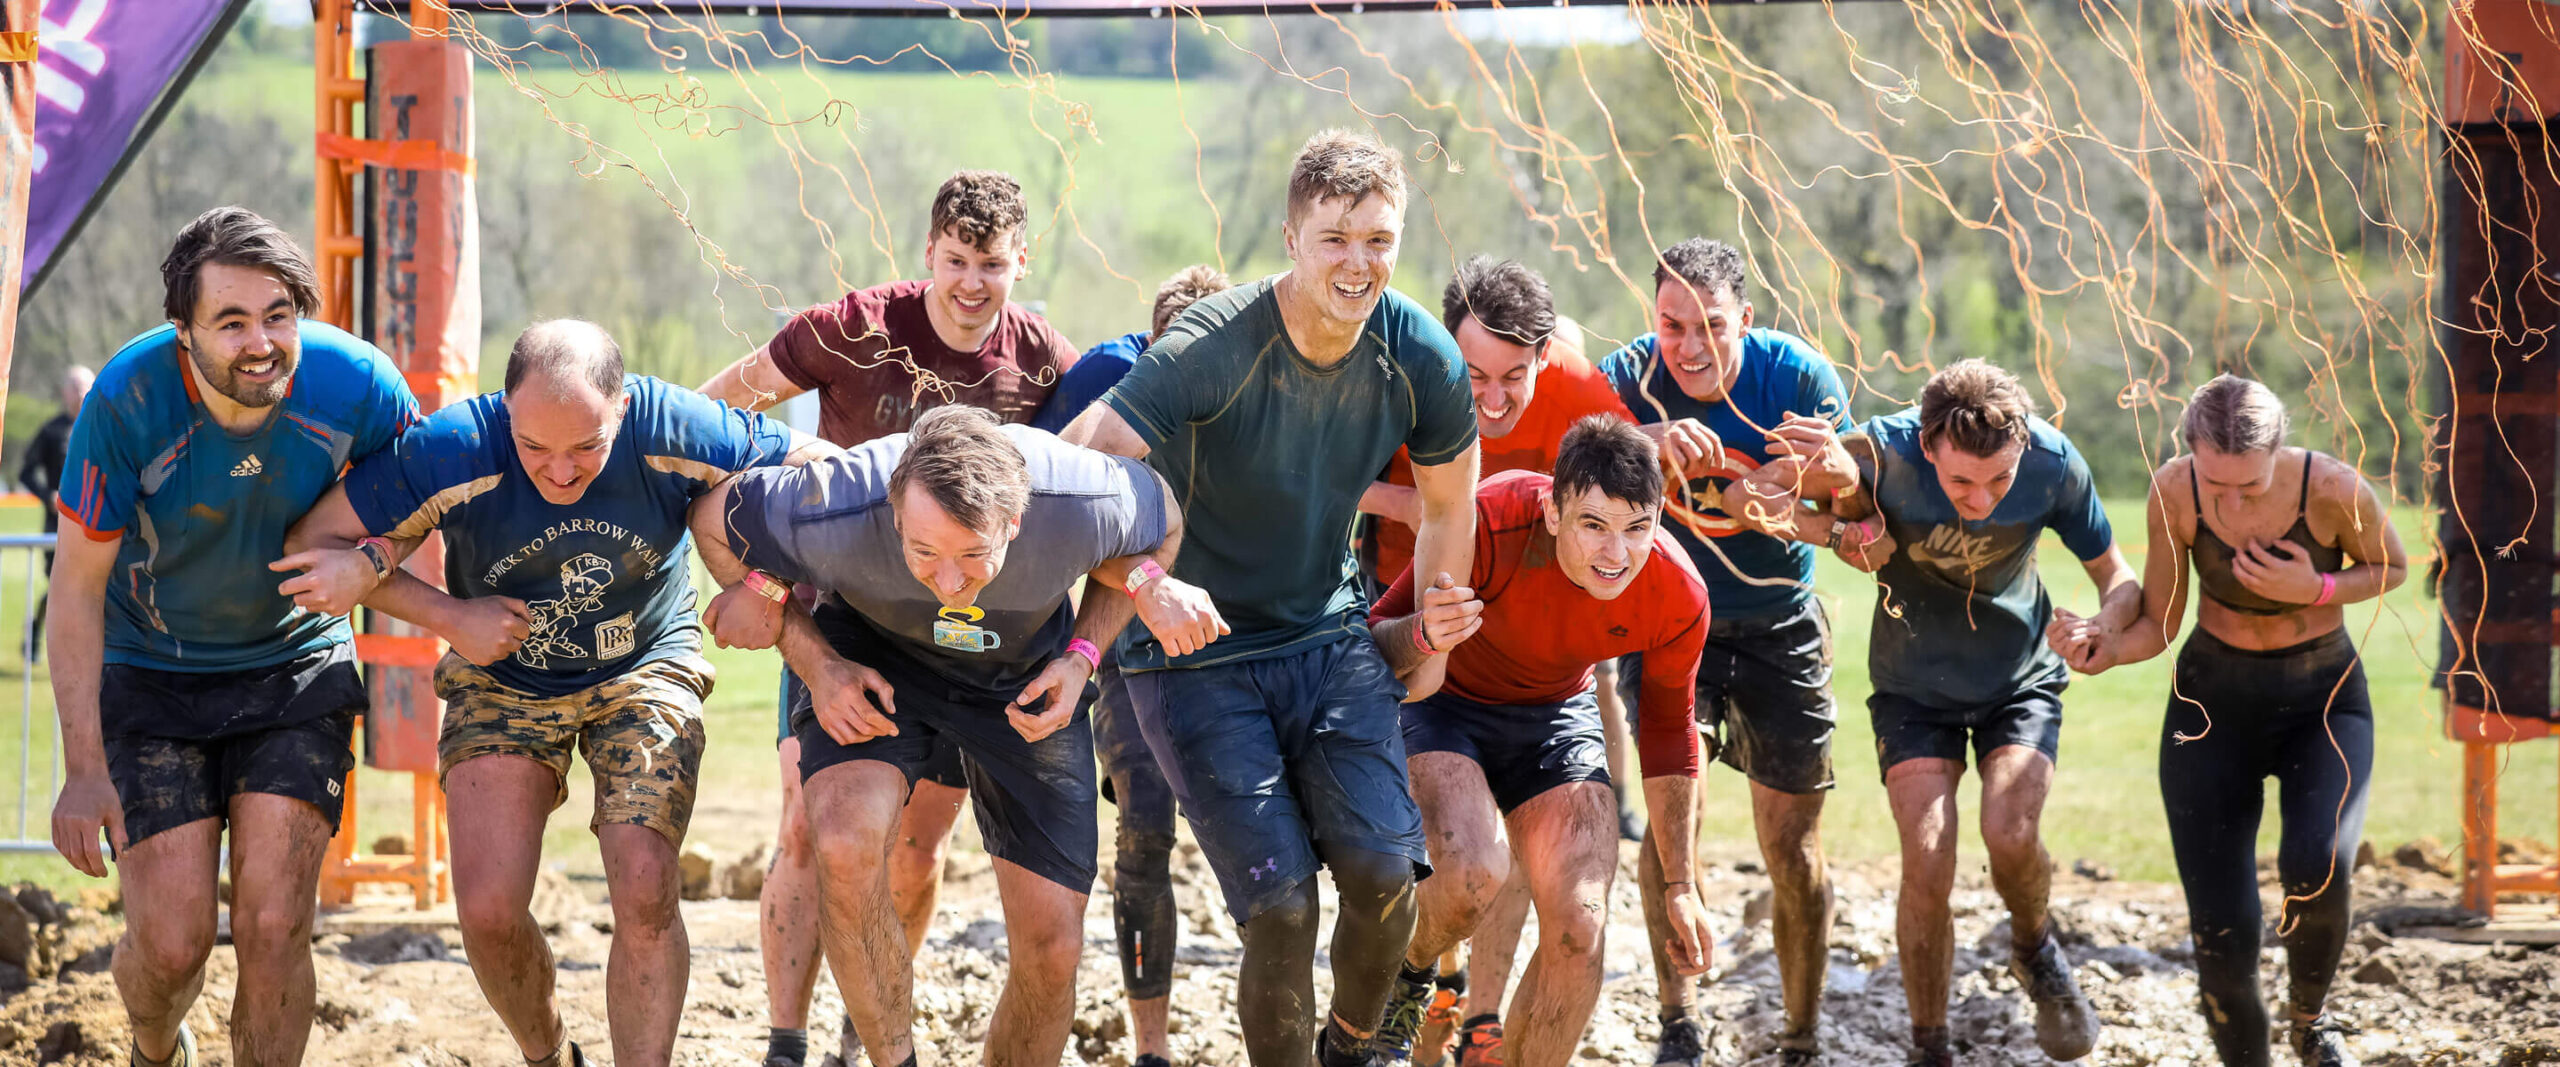 Tough Mudder UK World's Best Mud Run and Obstacle Course